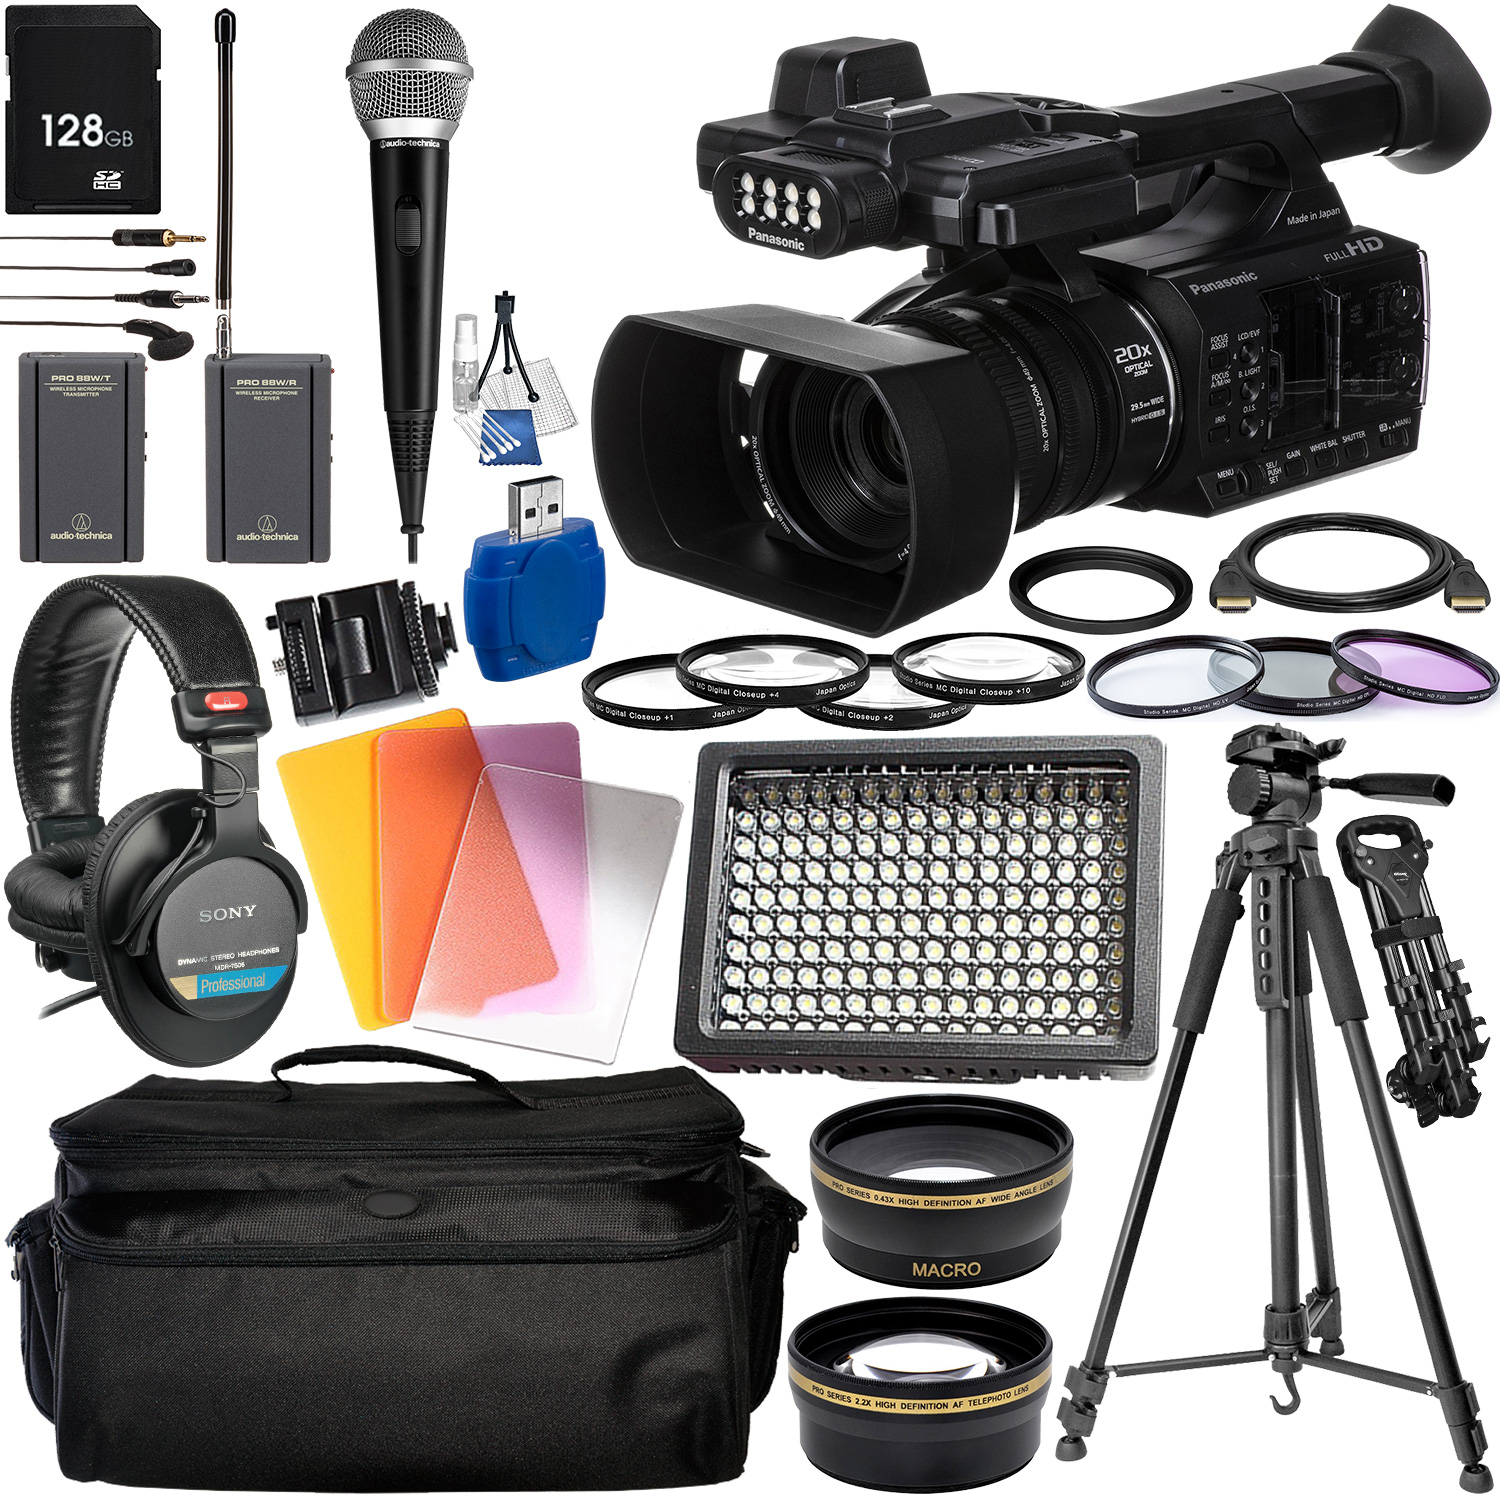 Panasonic AG-AC30 Full HD Camcorder with Built-In LED Light & Deluxe Accessory Bundle